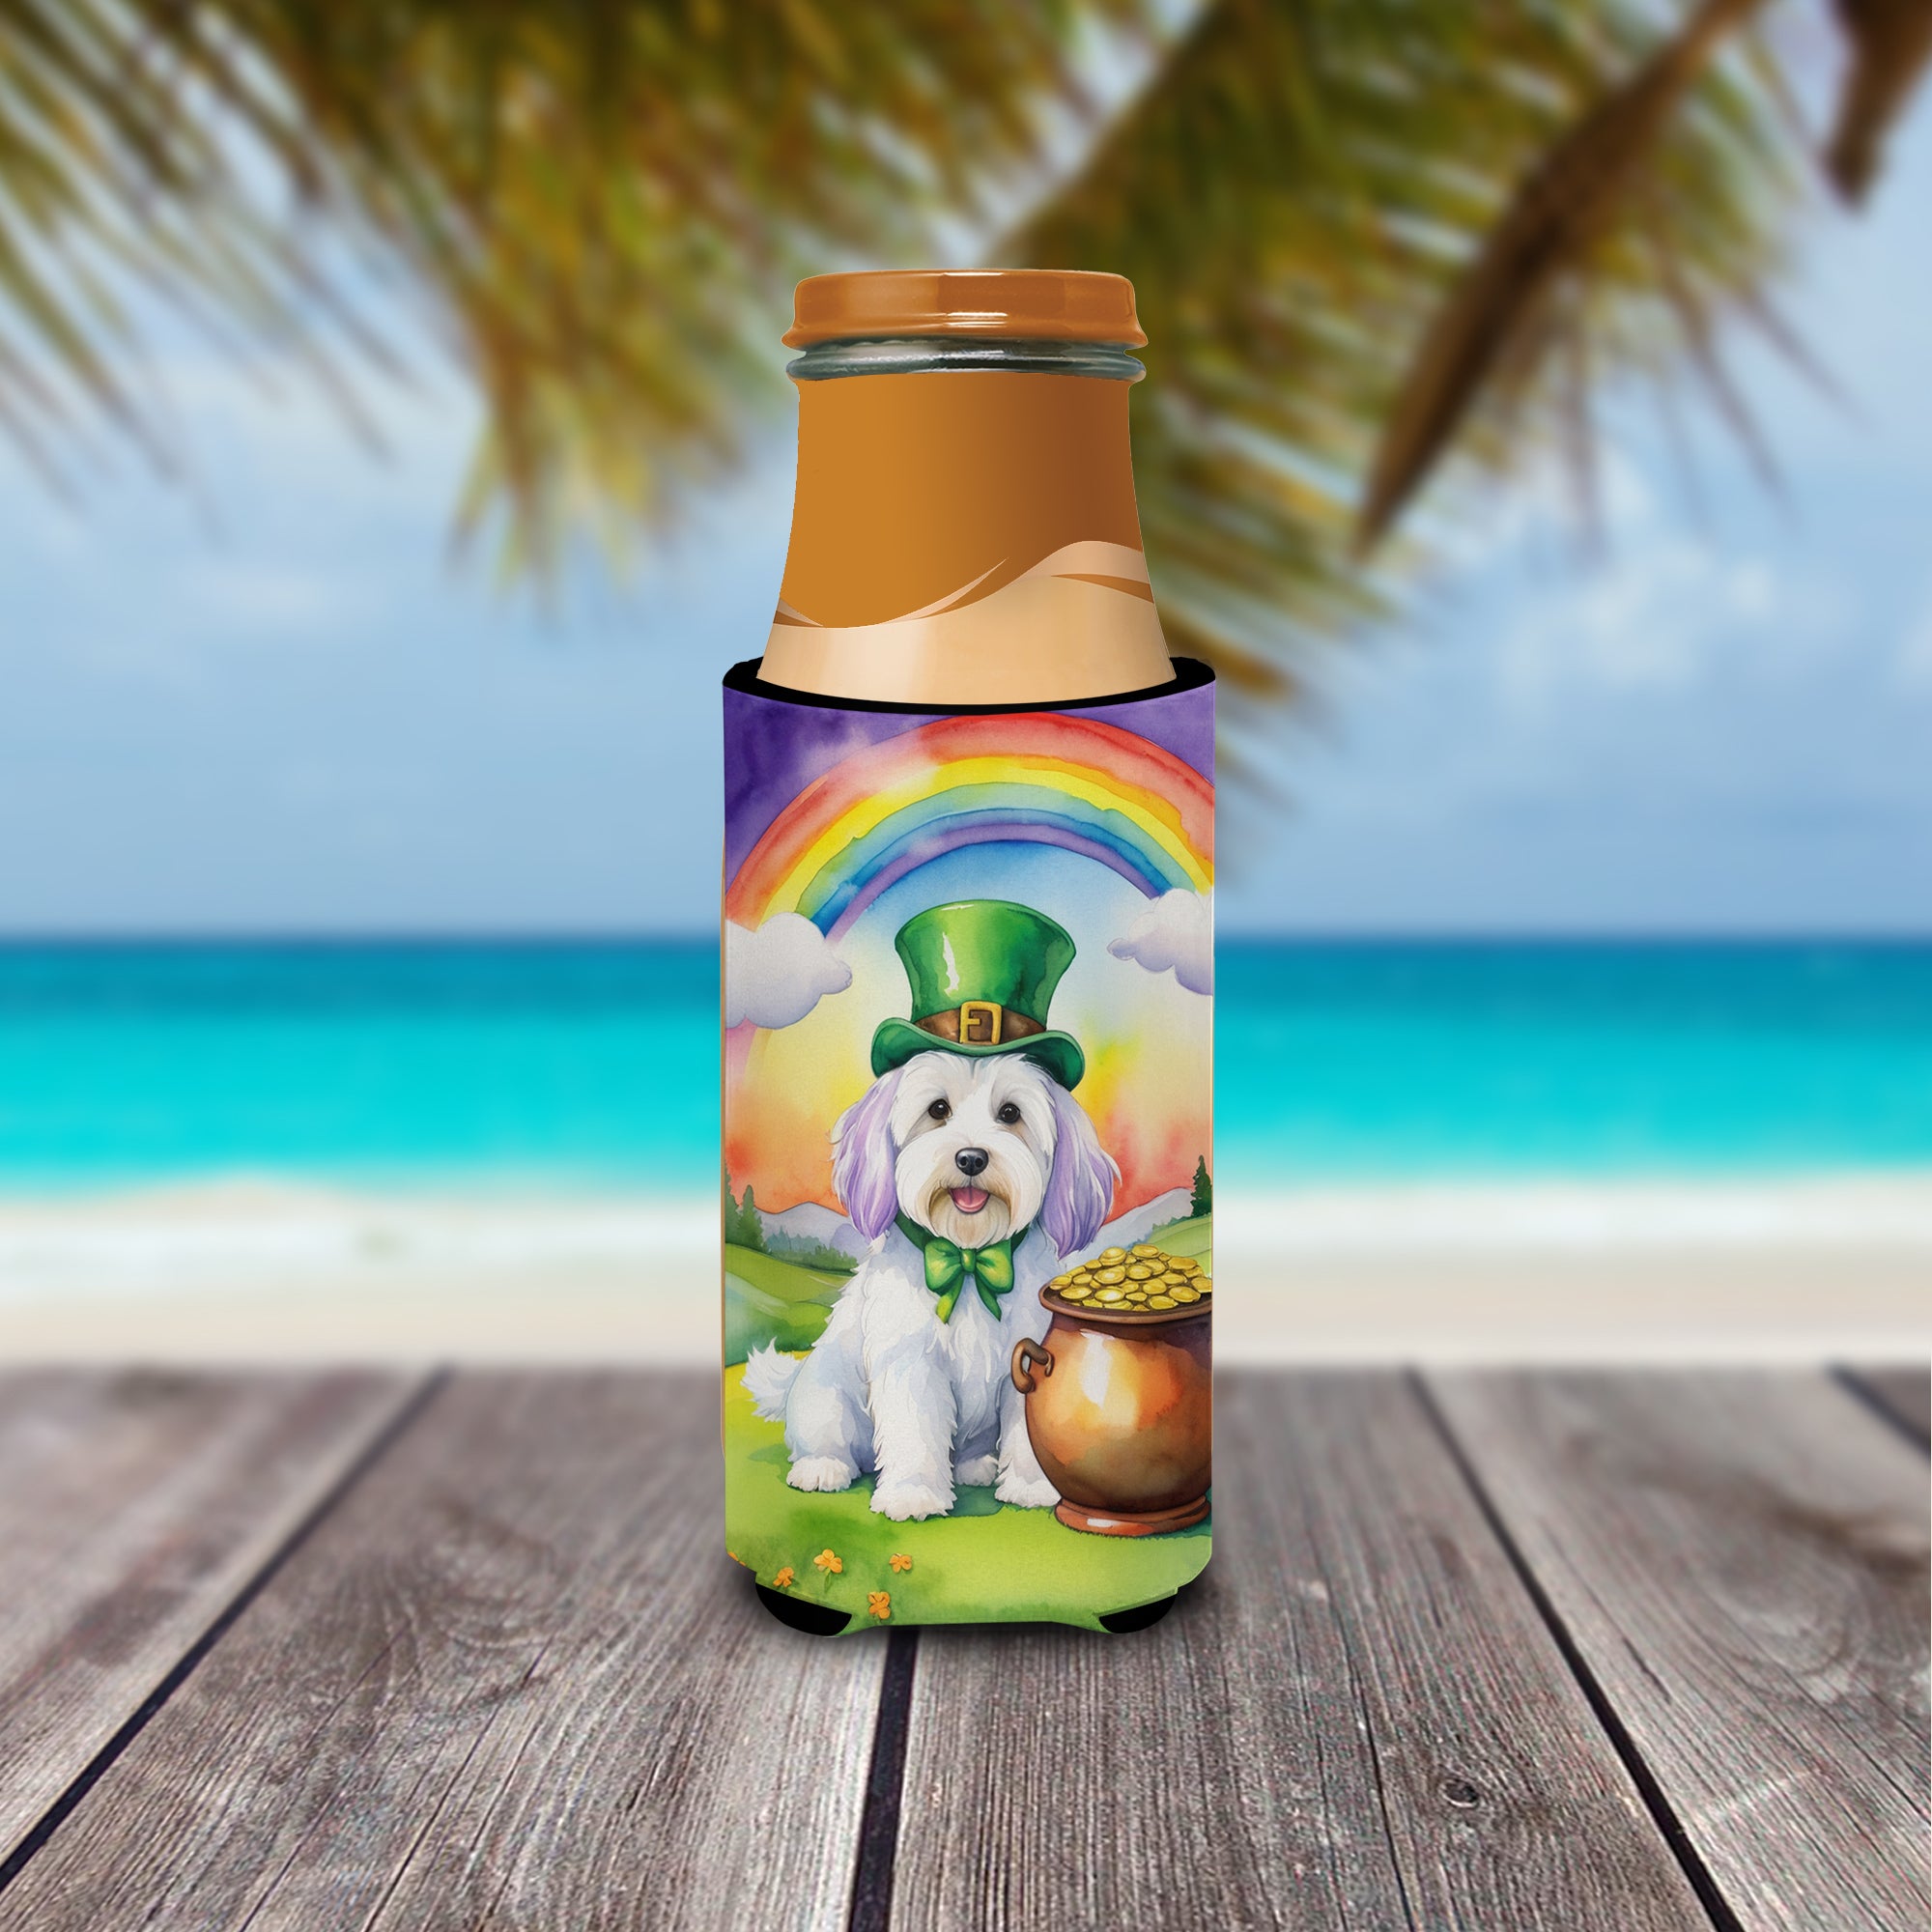 Coton de Tulear St Patrick's Day Hugger for Ultra Slim Cans